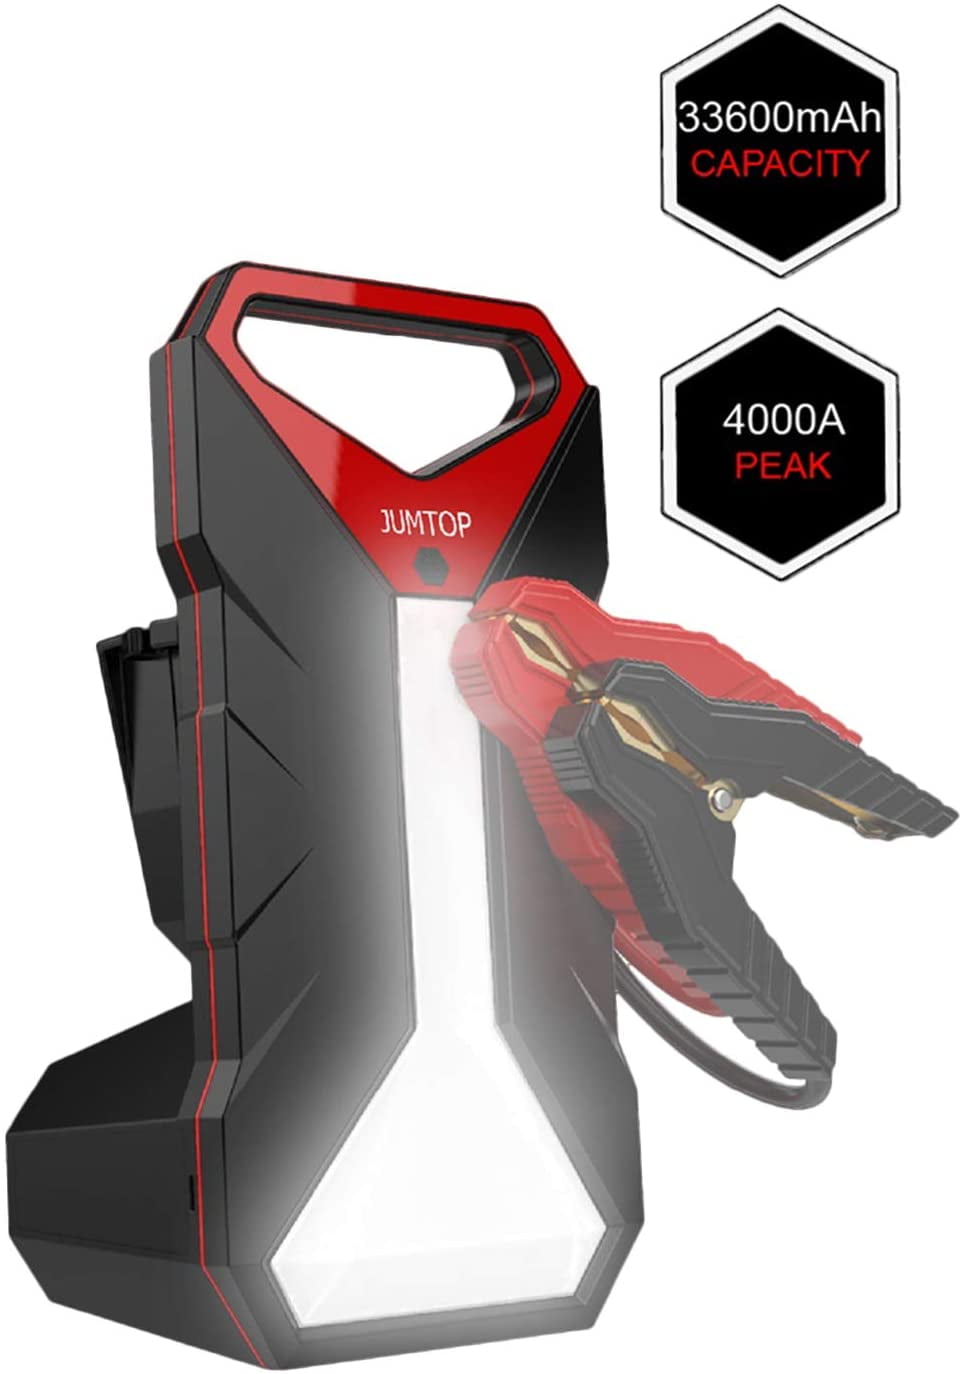 JUMTOP E18 2000A Peak Portable Car Jump Starter 8.0L Gas/6.5L Diesel Engine Auto Battery Booster & Power Bank and Phone Charger with Dual USB Smart Charging Port and LED Flashlight 